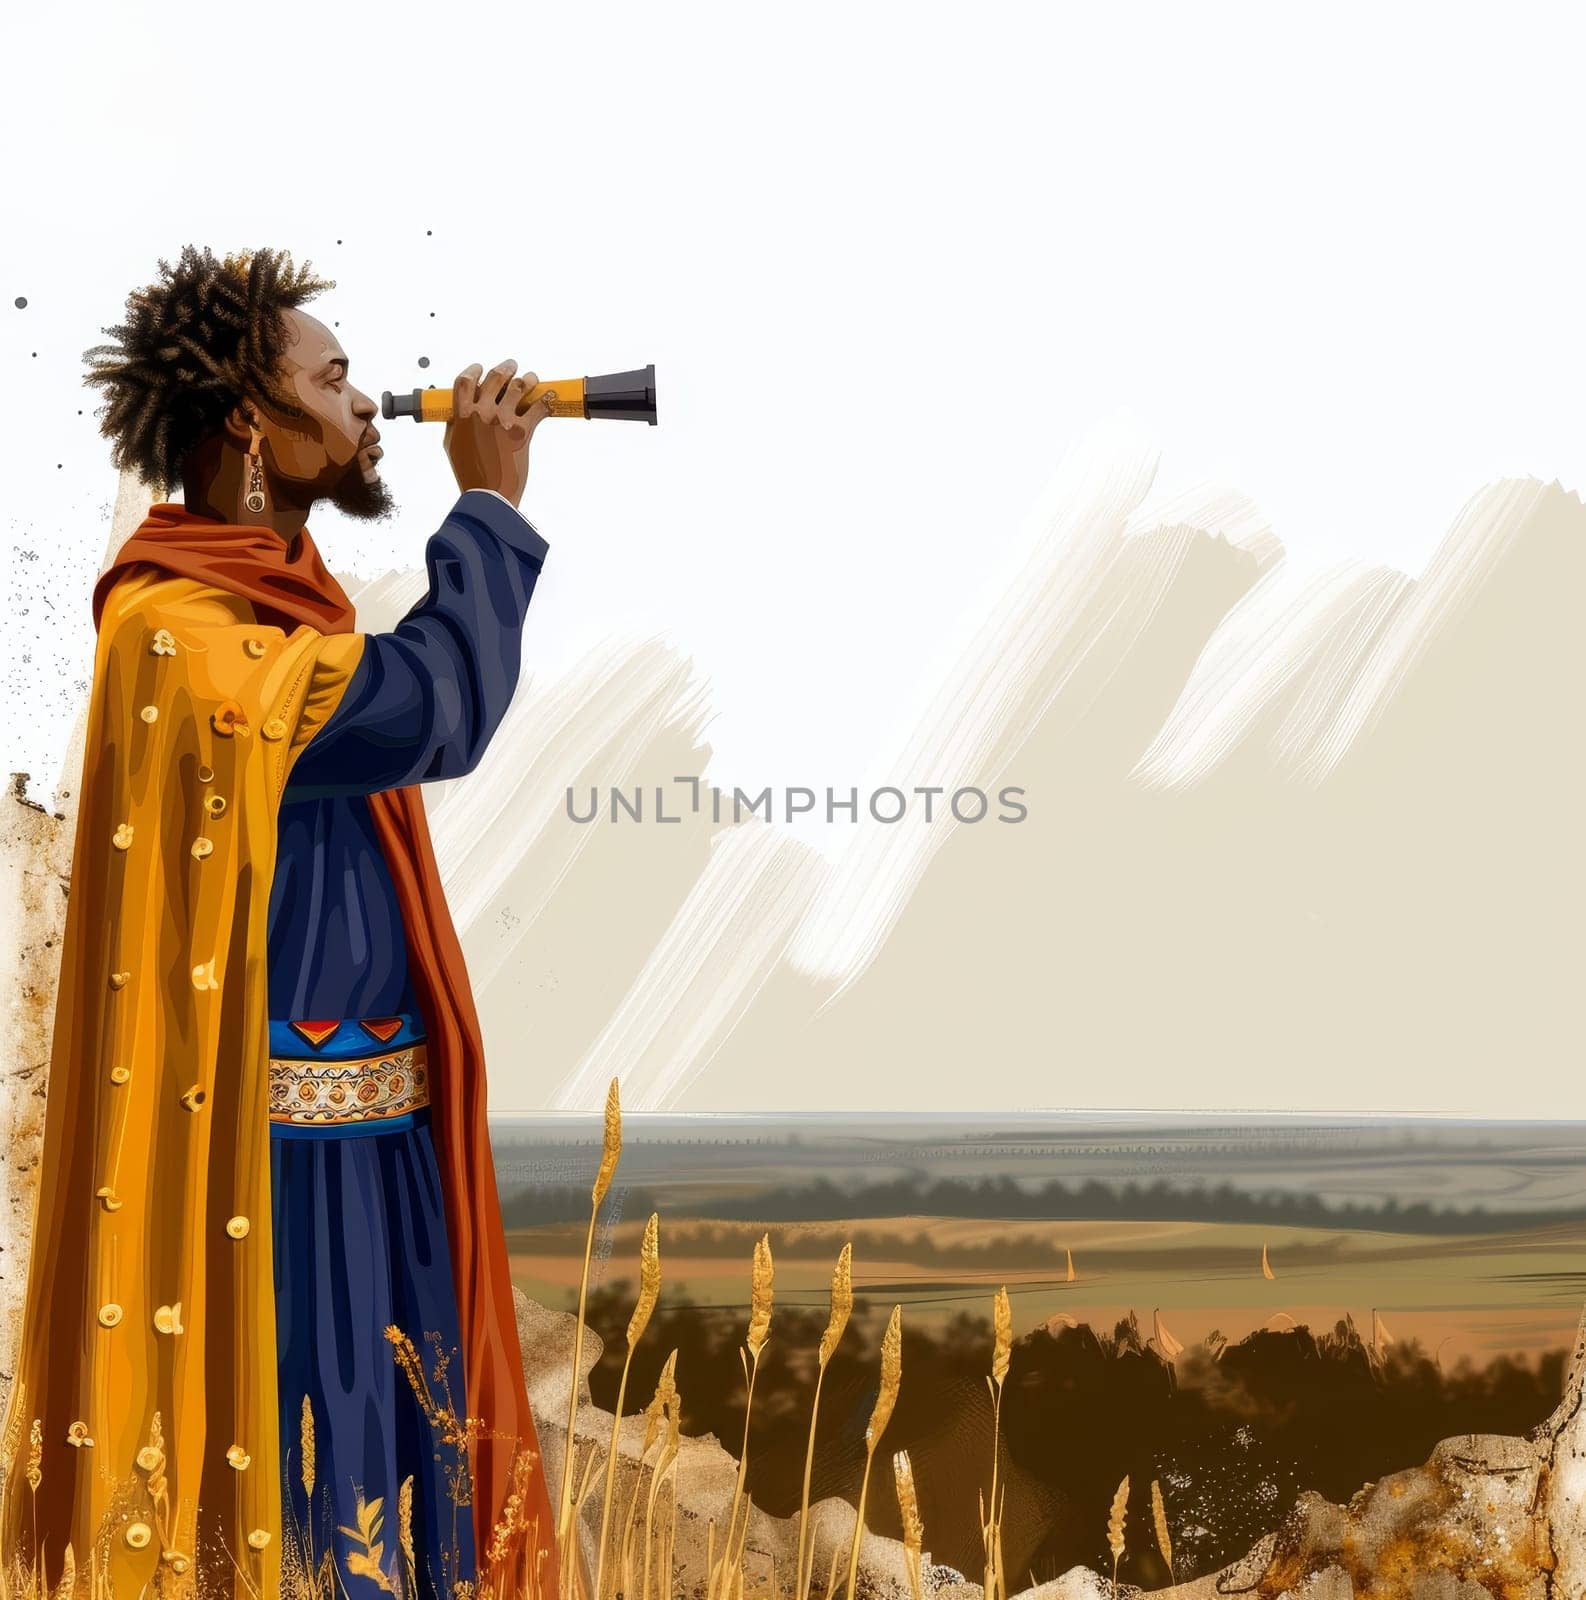 An illustration of a man in a traditional robe gazing through a telescope, surrounded by a backdrop of golden fields, symbolizing exploration and discovery.